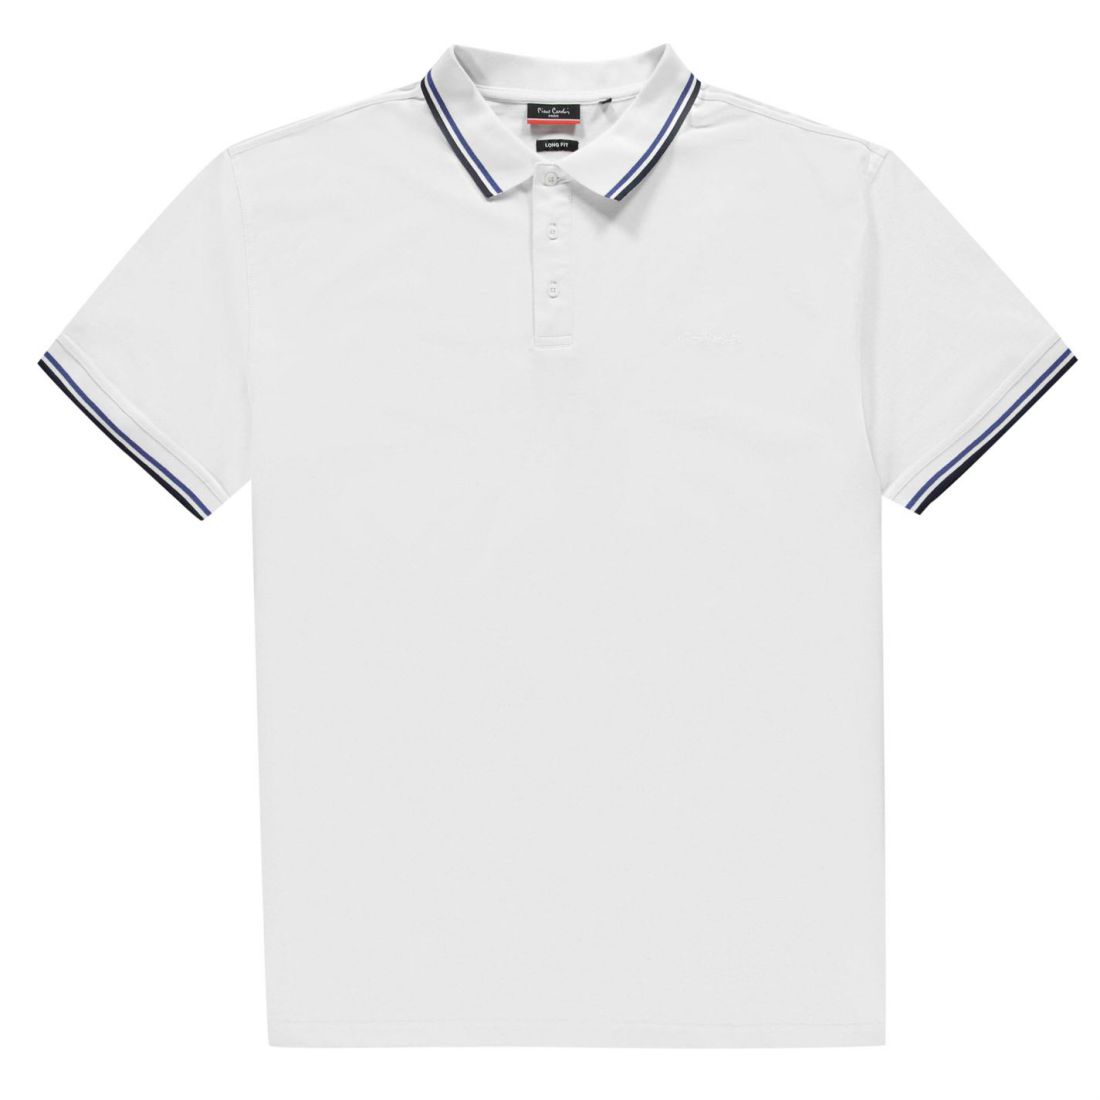 pierre cardin t shirts price in india